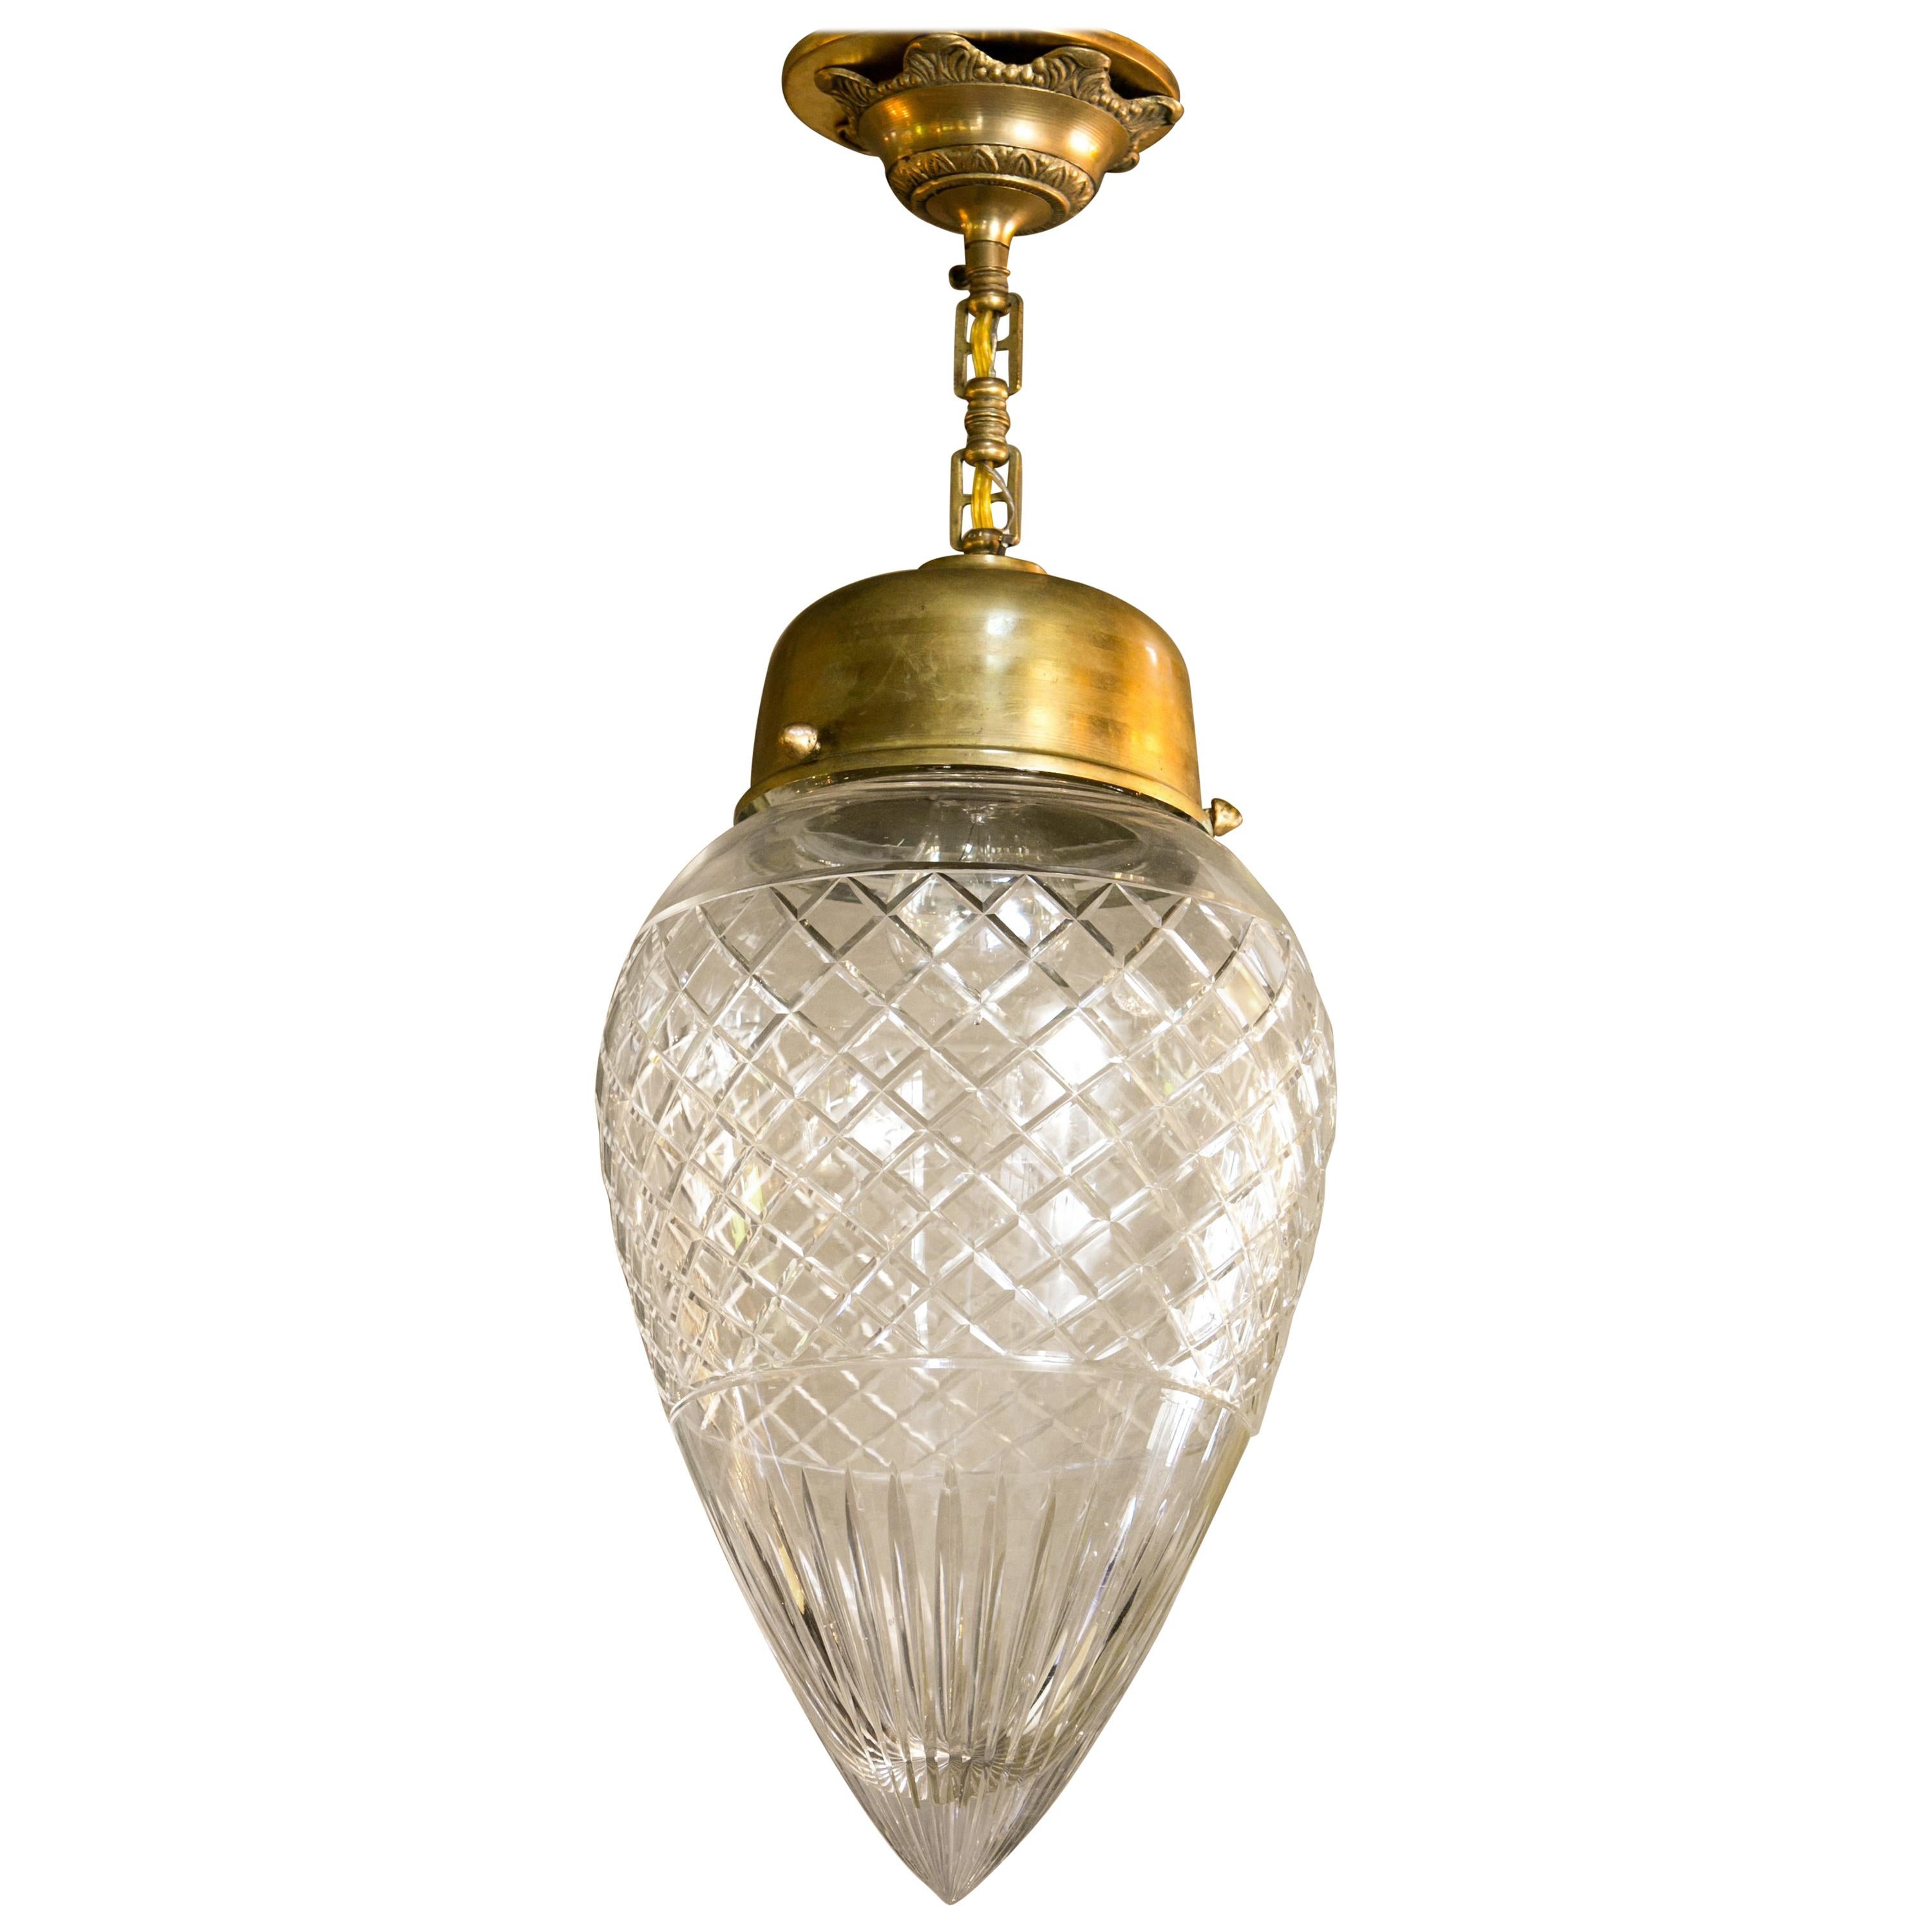 Antique French Cut glass pendant or hall lantern